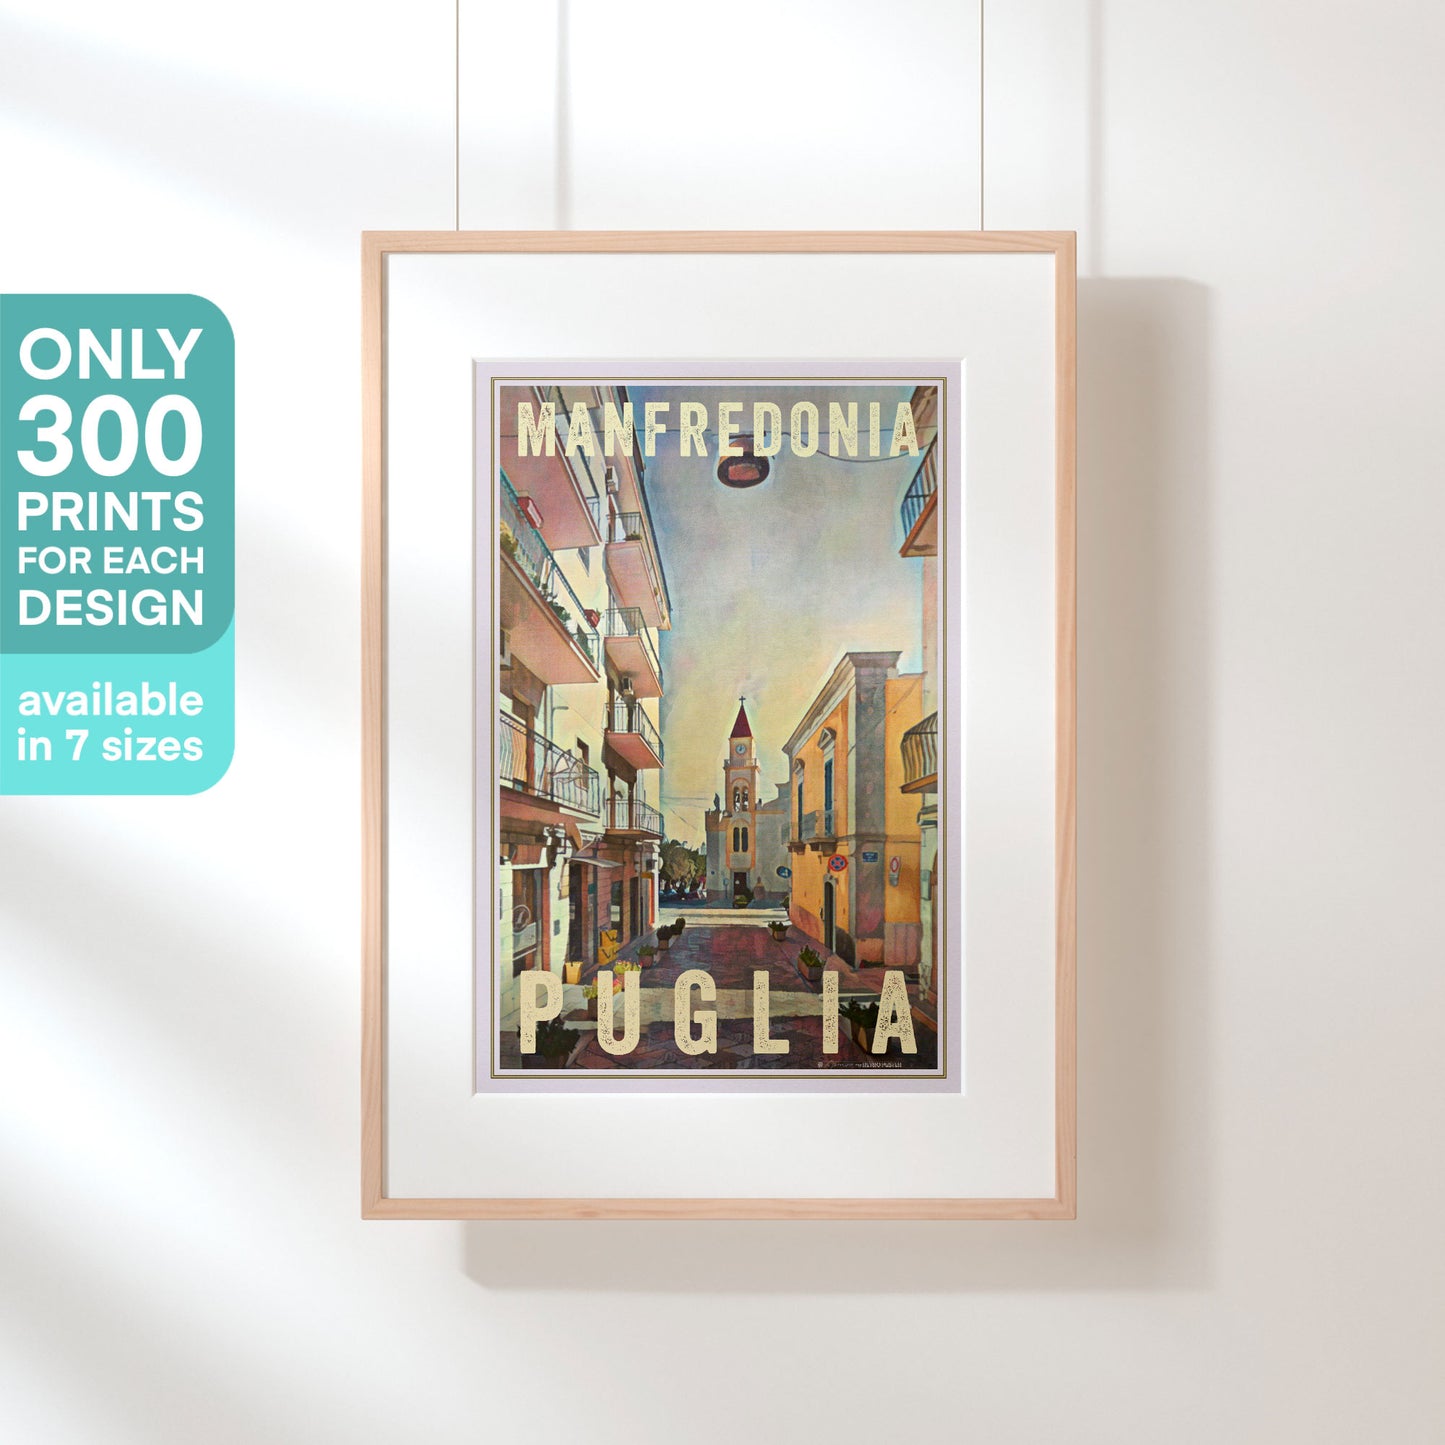 Limited Edition Puglia Travel Poster of Manfredonia by Alecse